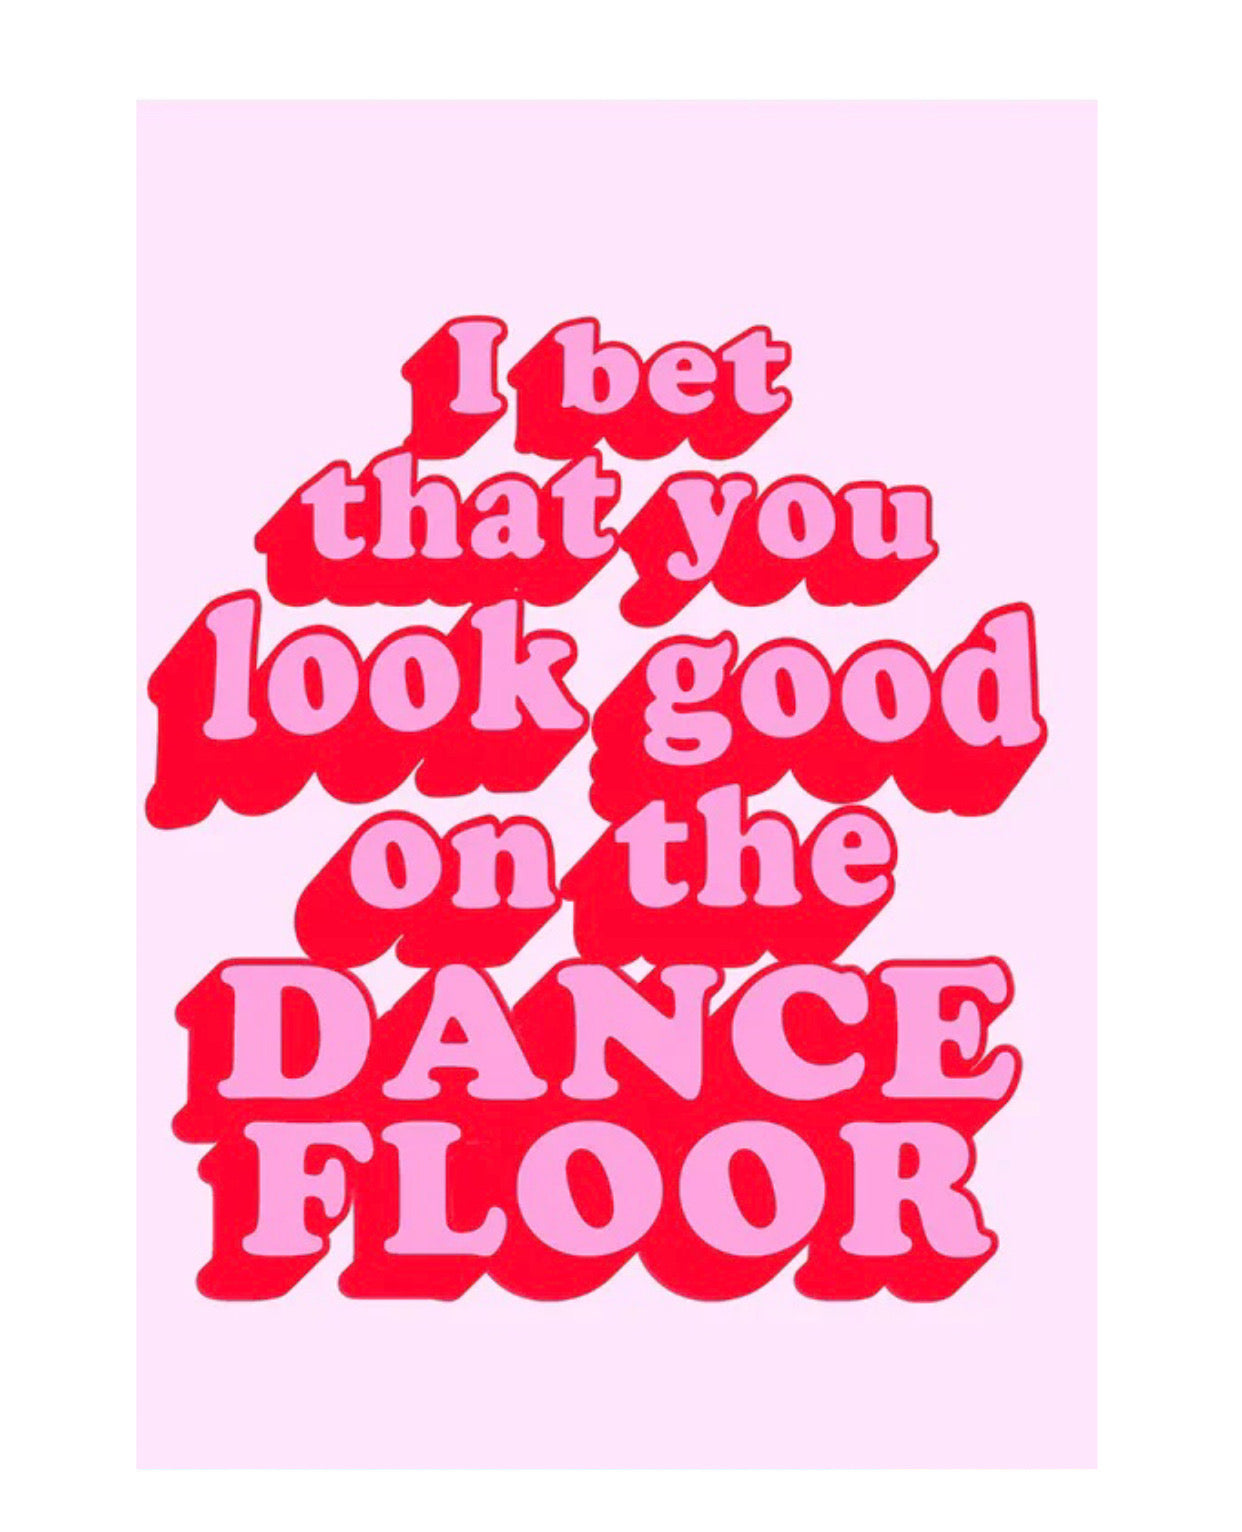 "i bet that you look good on the dance floor" poster